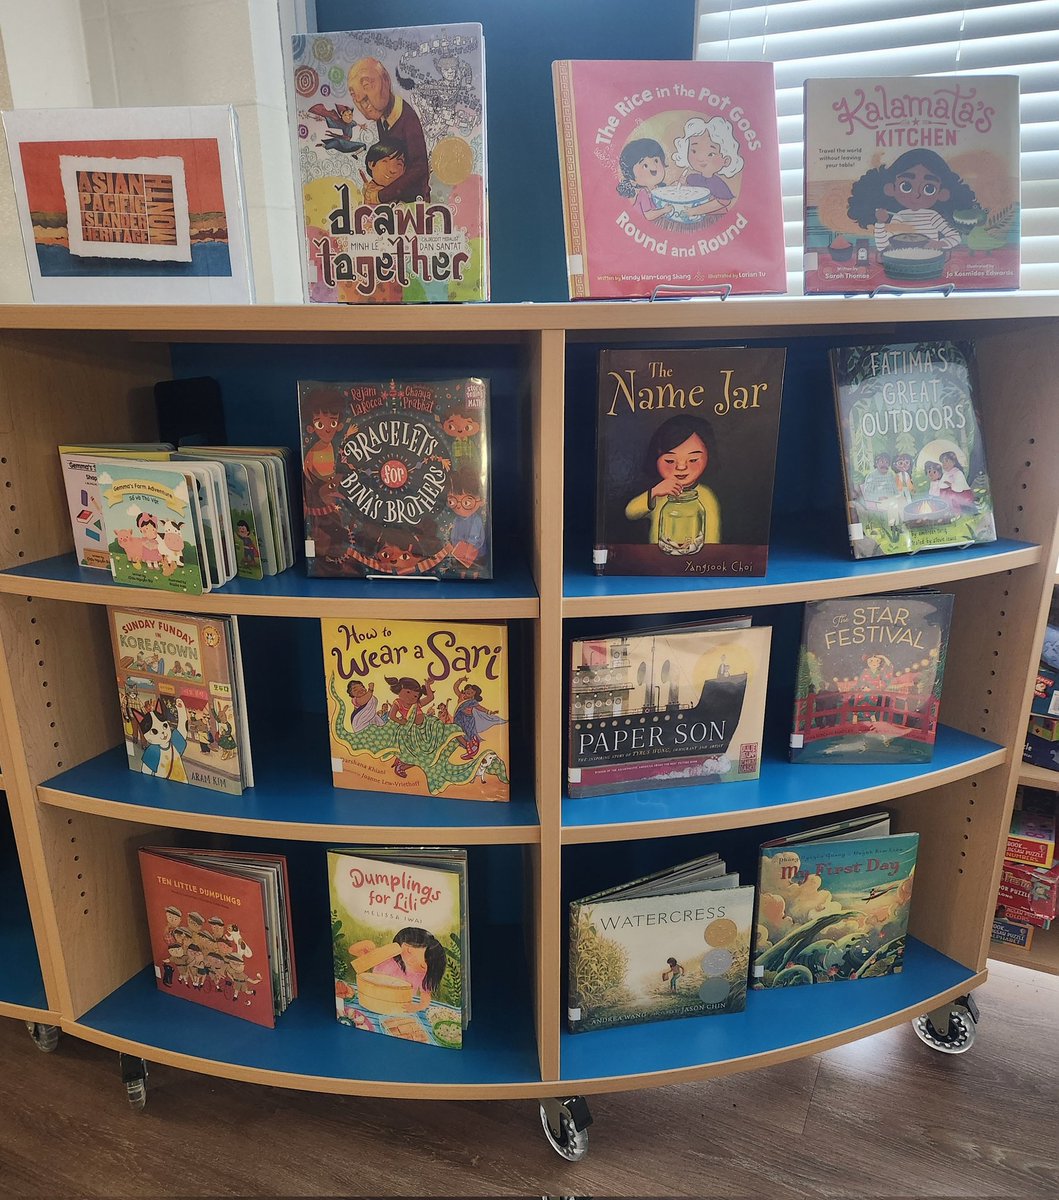 We have so many AWESOME books on display for #AAPIHeritageMonth! And they are flying off the shelves! See any of your favorites? #BooksForAll #WeNeedDiverseBooks @HISDLibraryServ